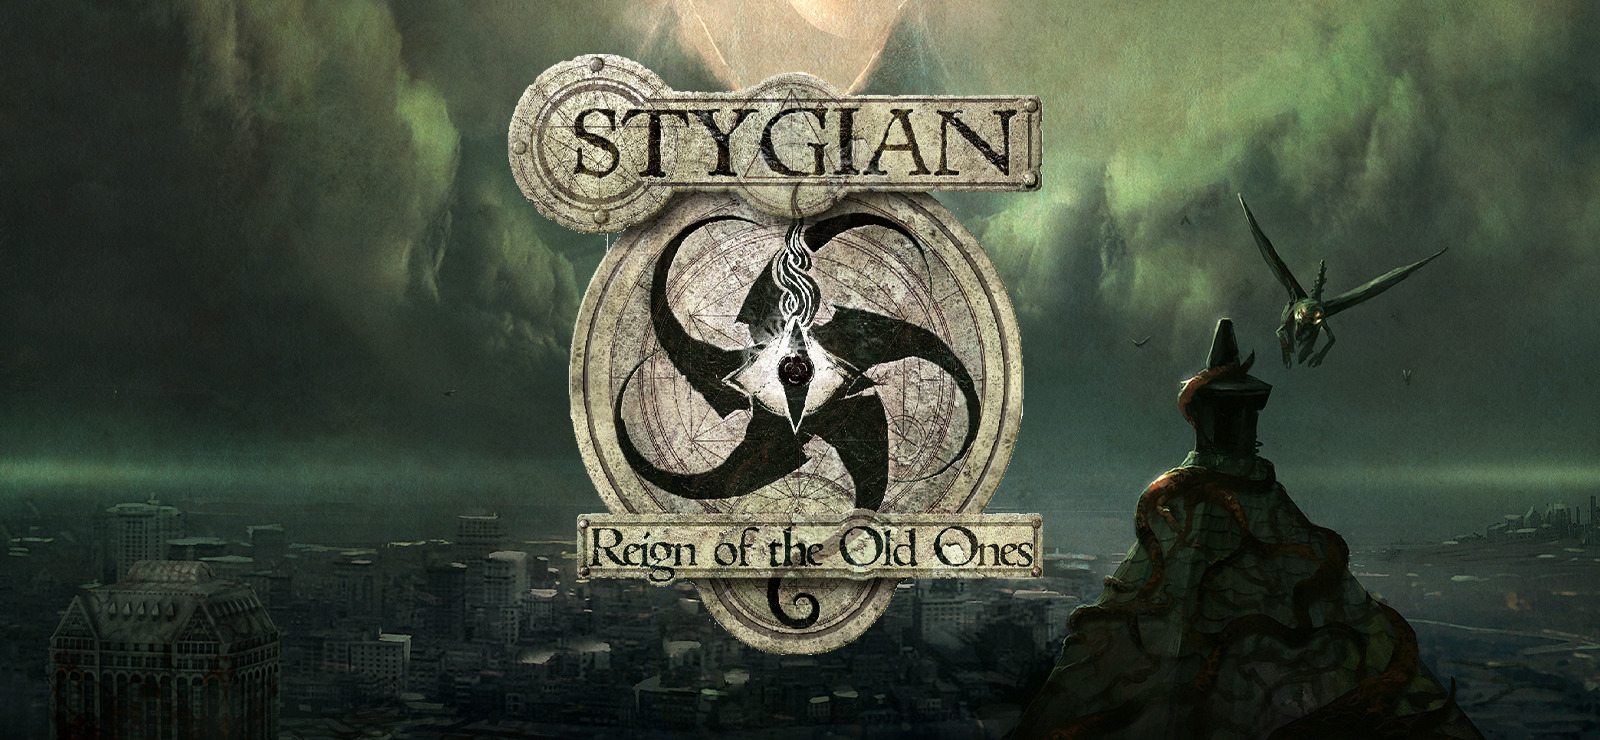 Try ones games. Лавкрафт Stygian. Stygian: Reign of the old ones обложка. Игра Stygian Reign of the old ones. Stygian Ктулху.